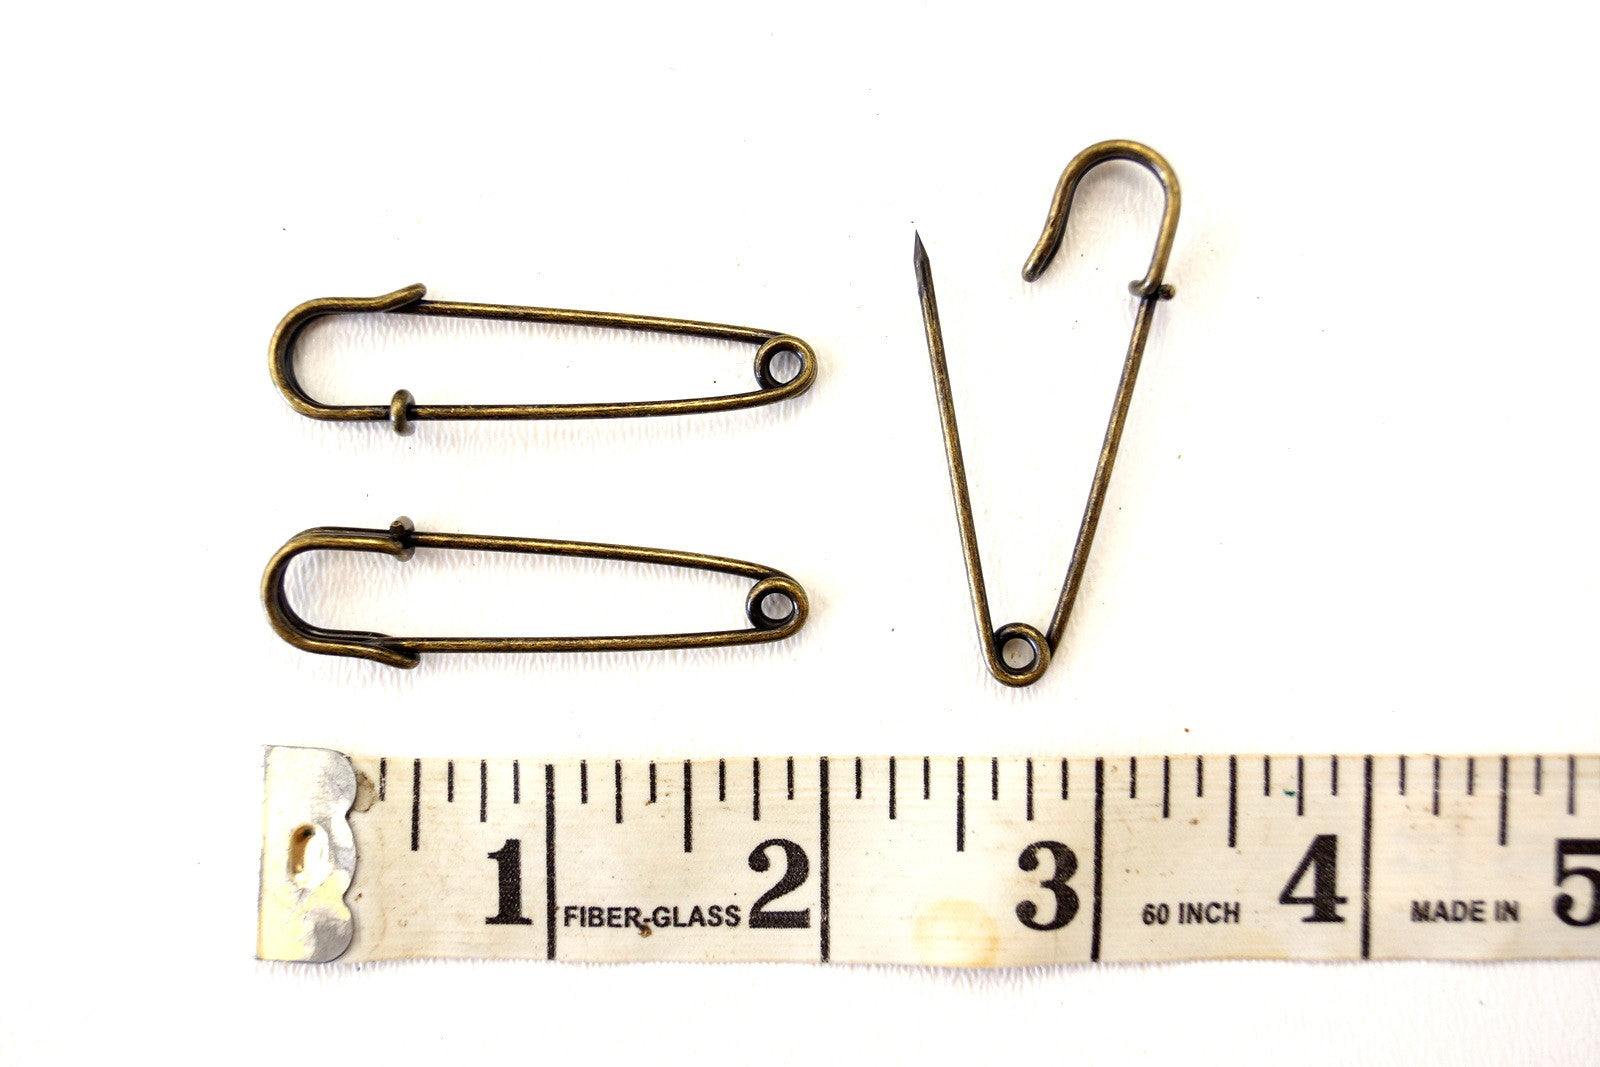 Metal Laundry Pin Style Pins in Antique Brass Finish, 2